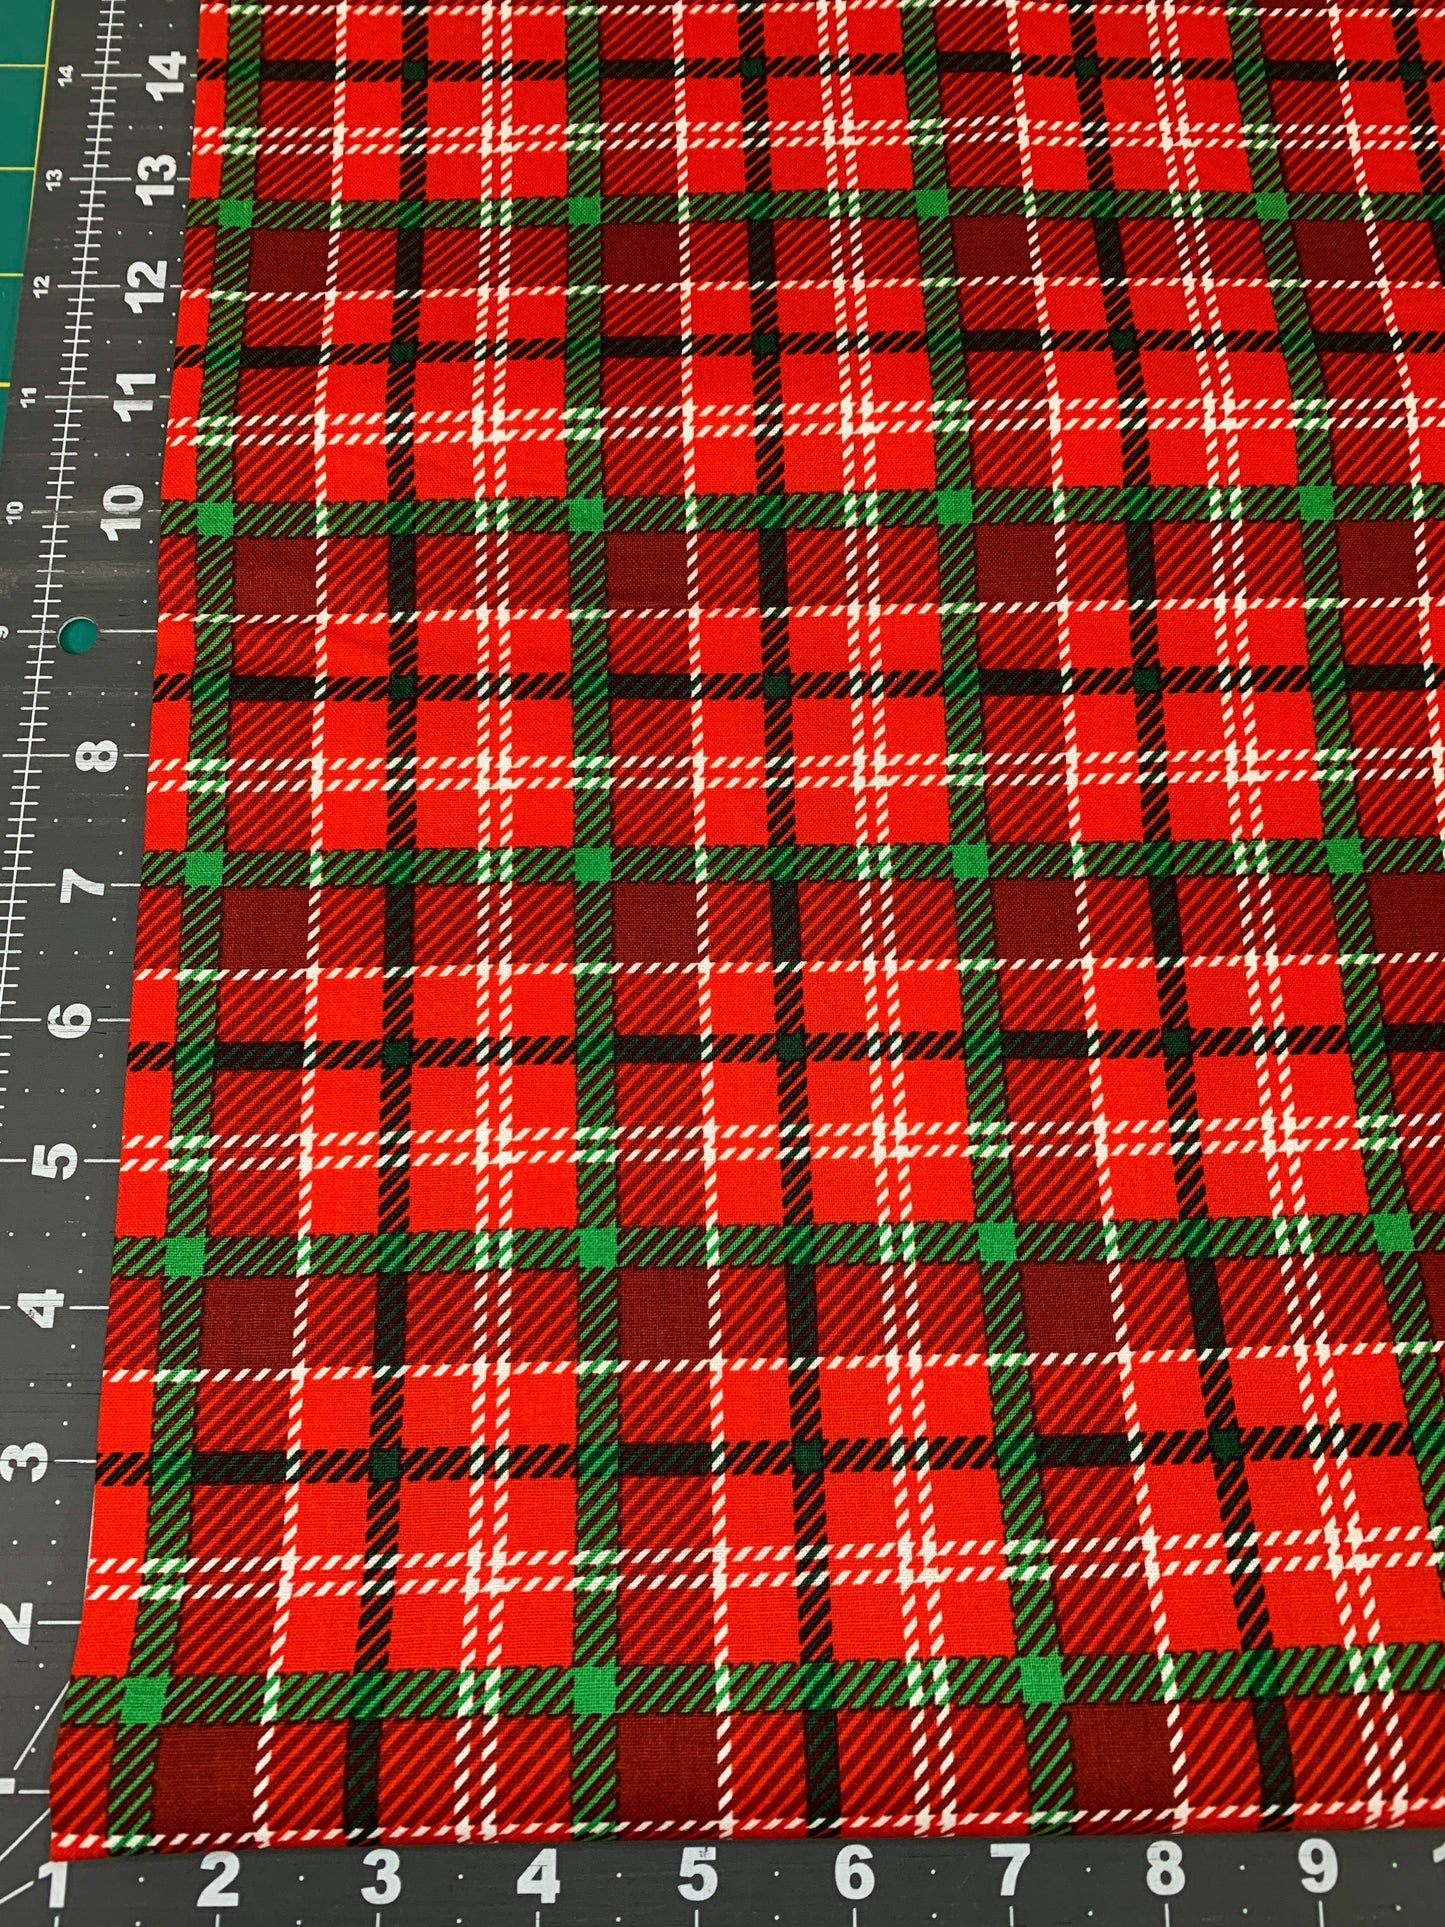 Atwood Plaid fabric DX-2373  Red Green plaid fabric